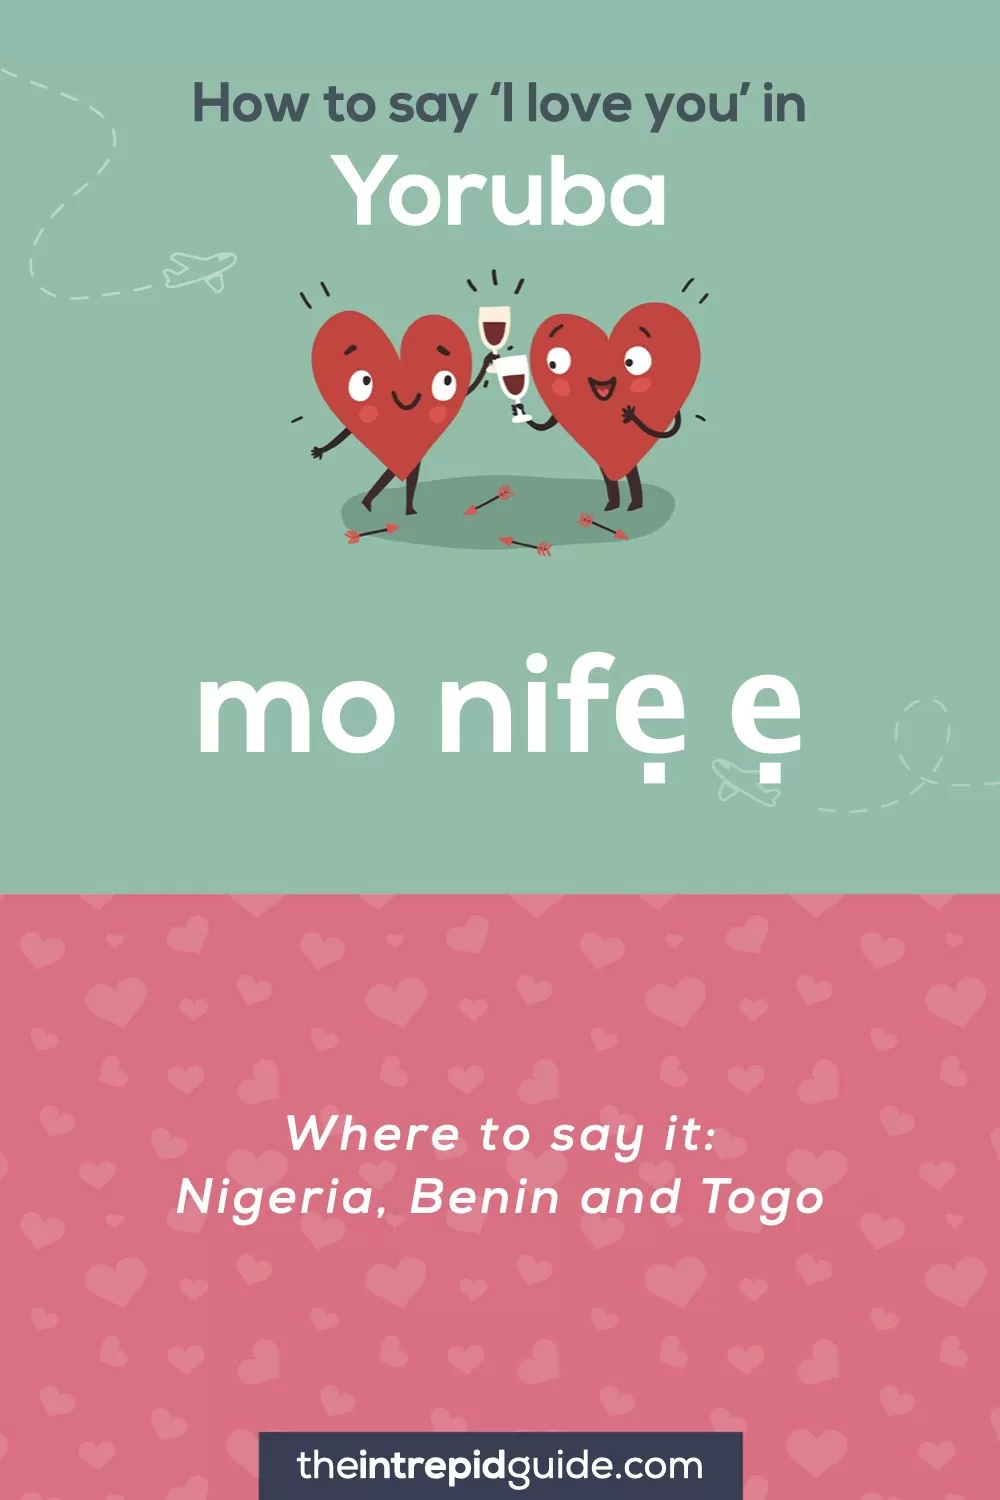 How to say I love you in different languages - Yoruba - mo nifẹ ẹ